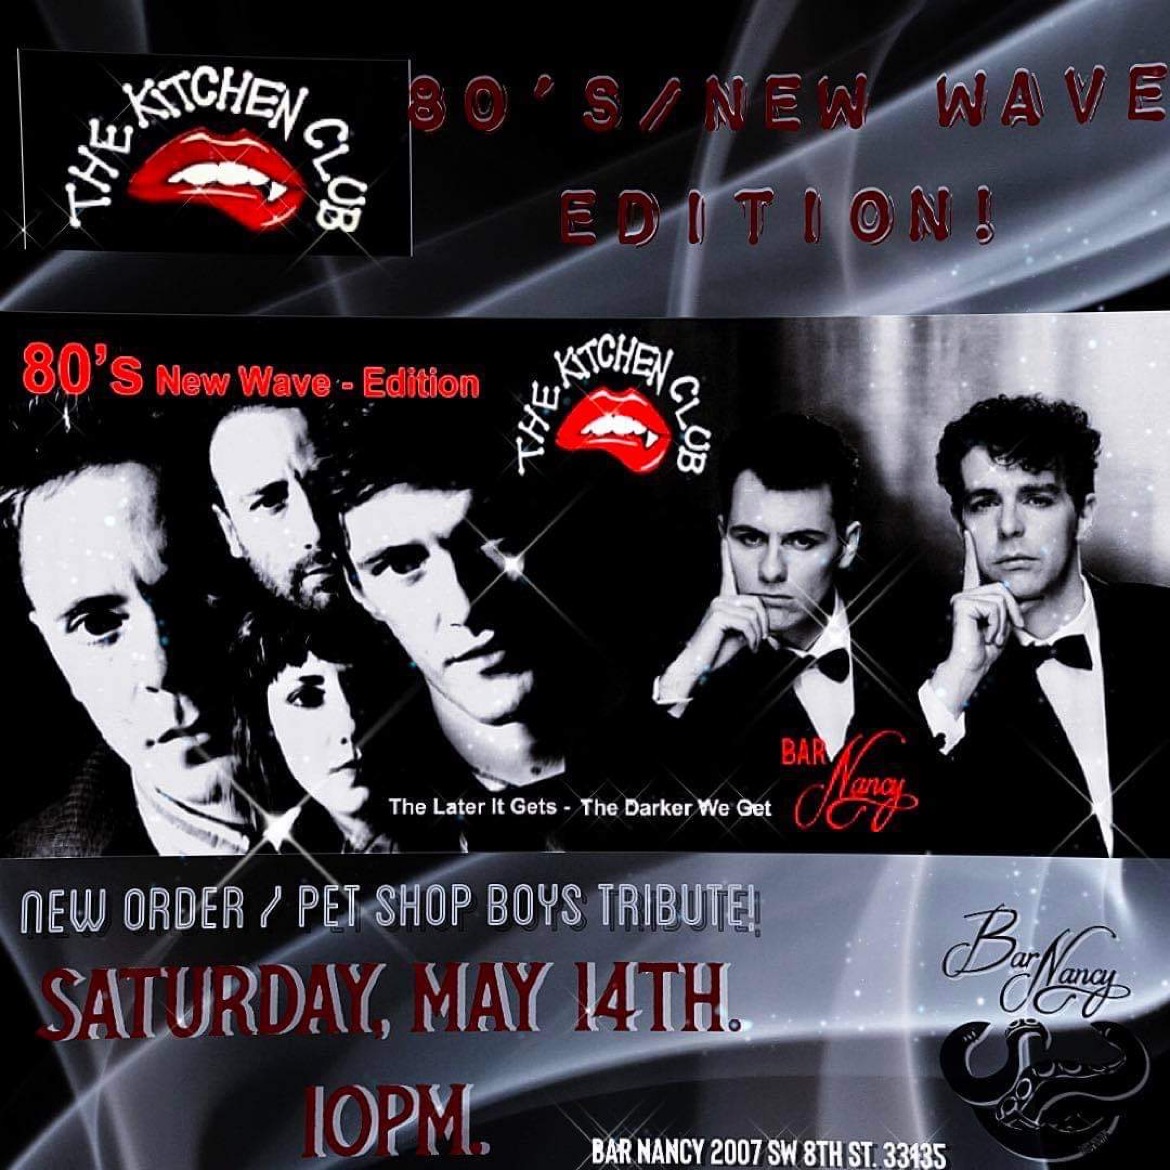 The Kitchen Club - 80's New Wave at Bar Nancy - New Order - Pet Shop Boys tribute